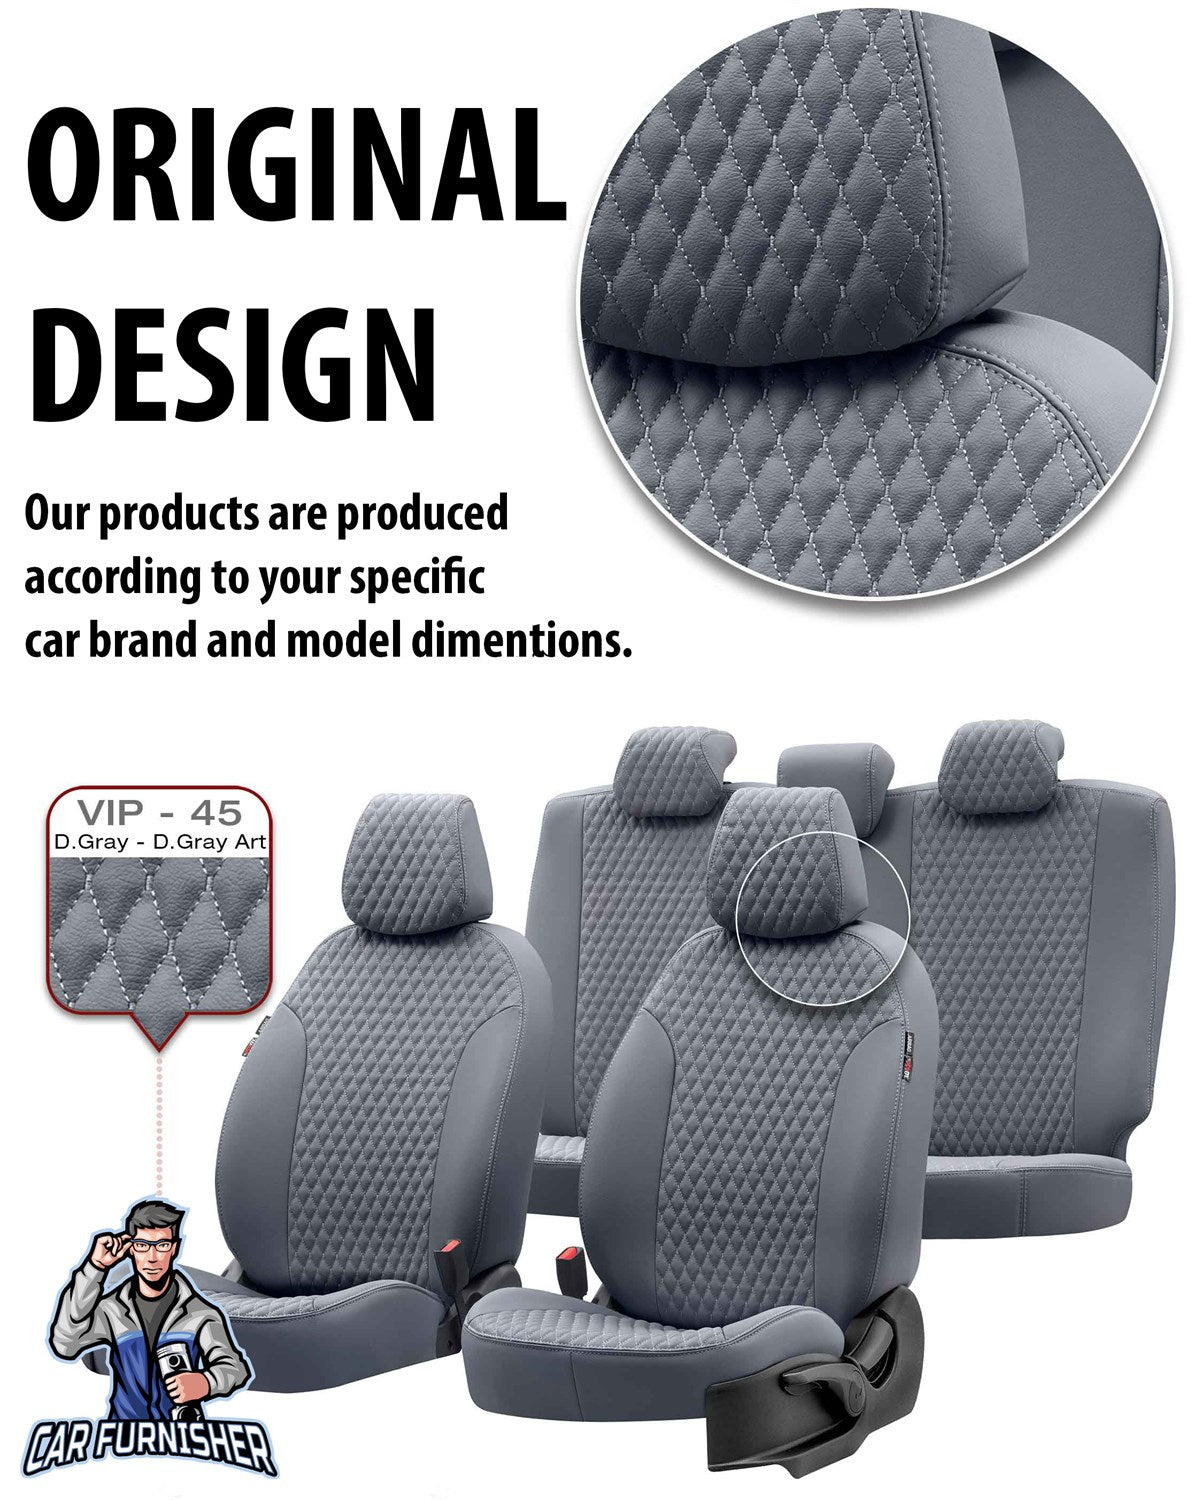 Hyundai Accent Seat Covers Amsterdam Leather Design Black Leather